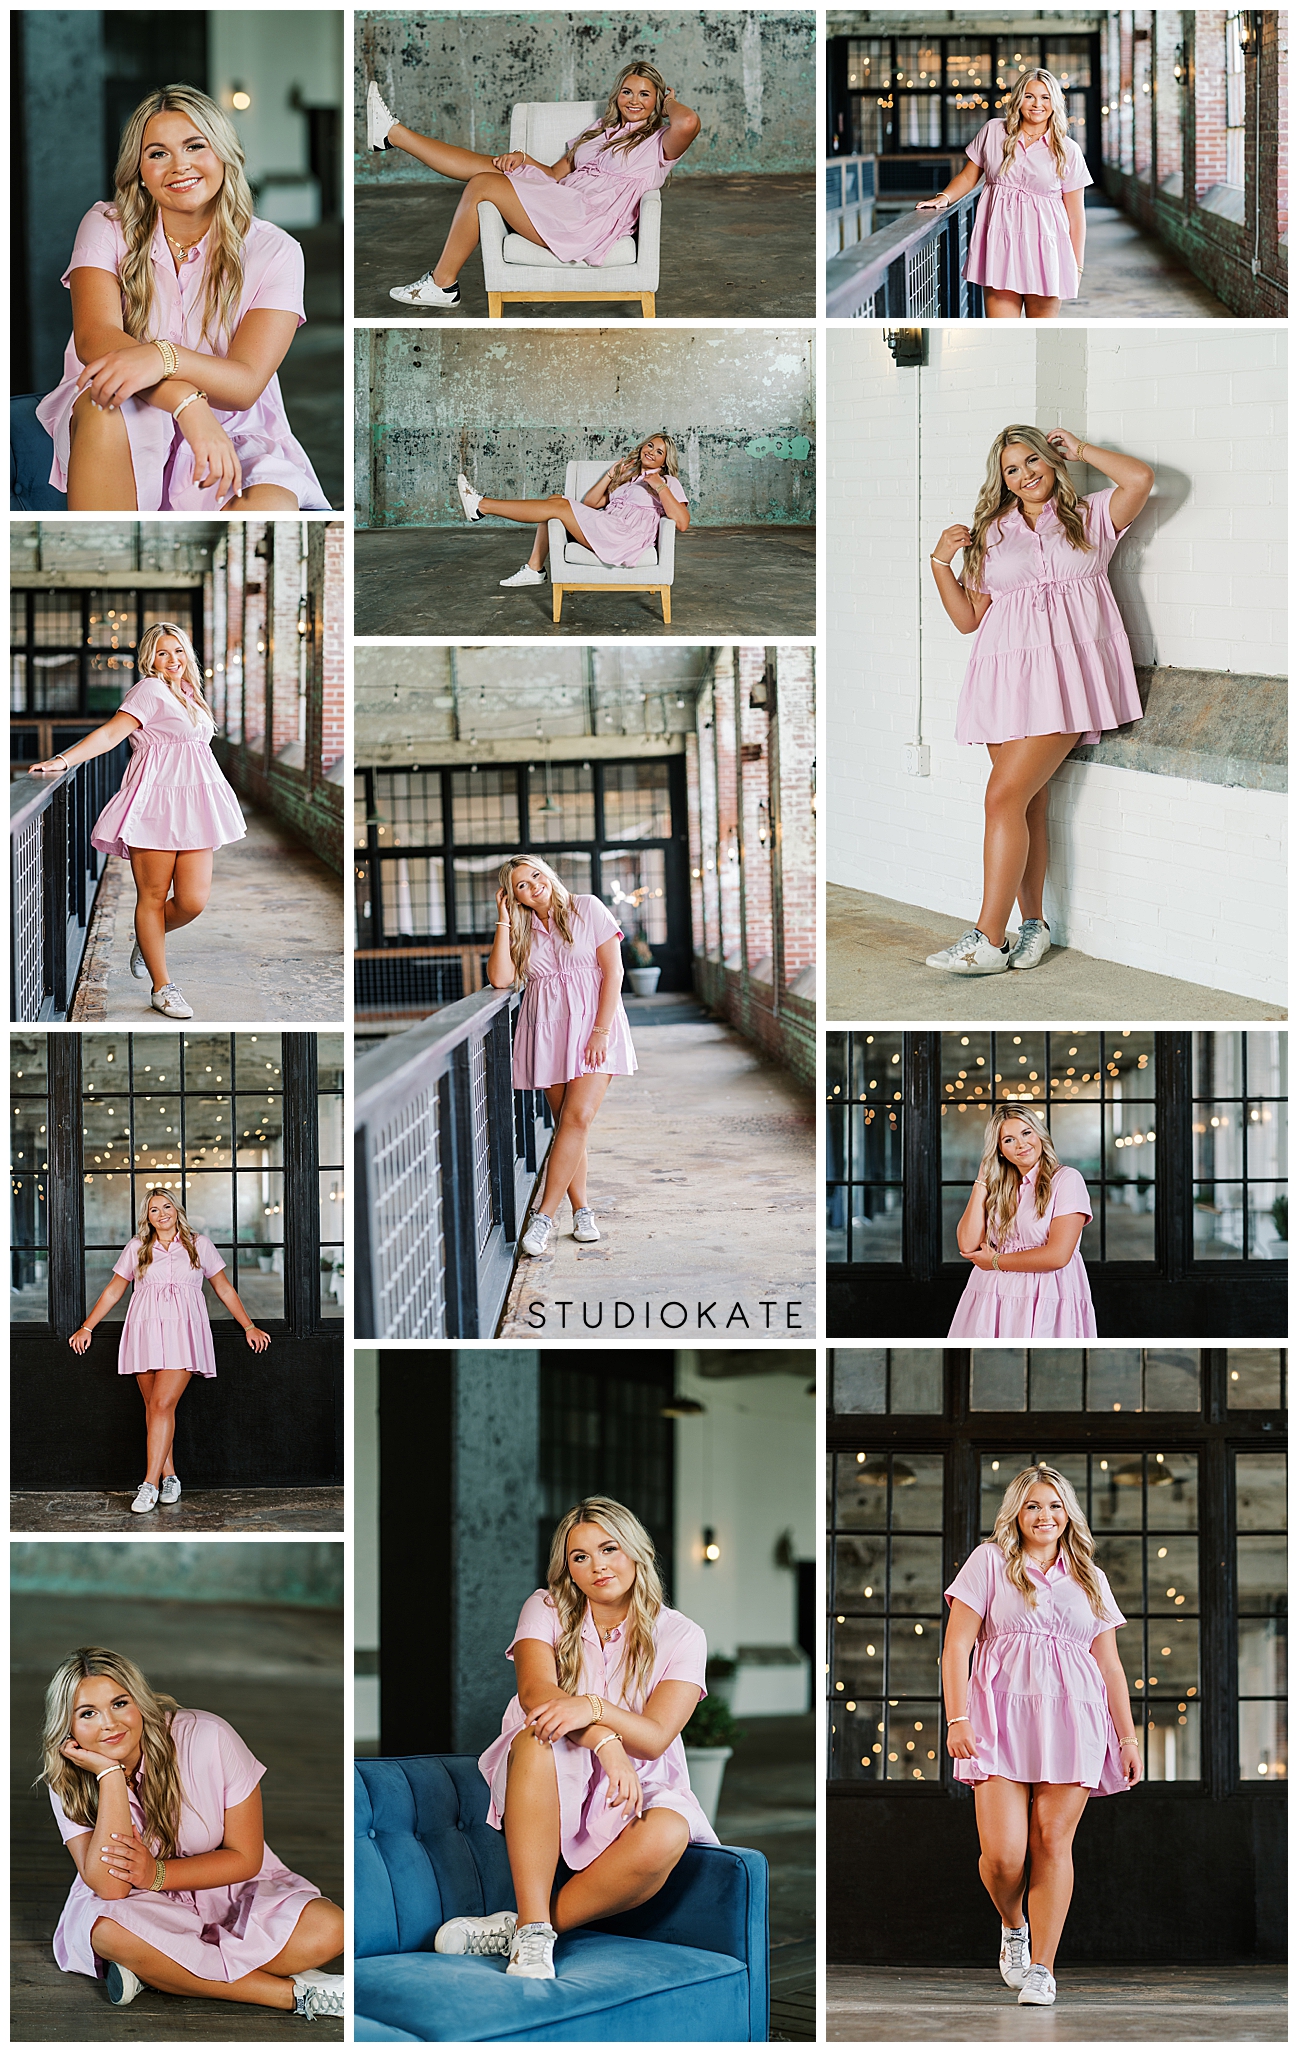 Lindale Mill, Model High School, Senior Pictures, Best Senior Photographer Near Me, Christian Heritage, Dalton Ga, What is a style consult, What to wear for senior pictures, Darlington School, Senior Pictures in Rome Georgia, Studio Kate Seniors